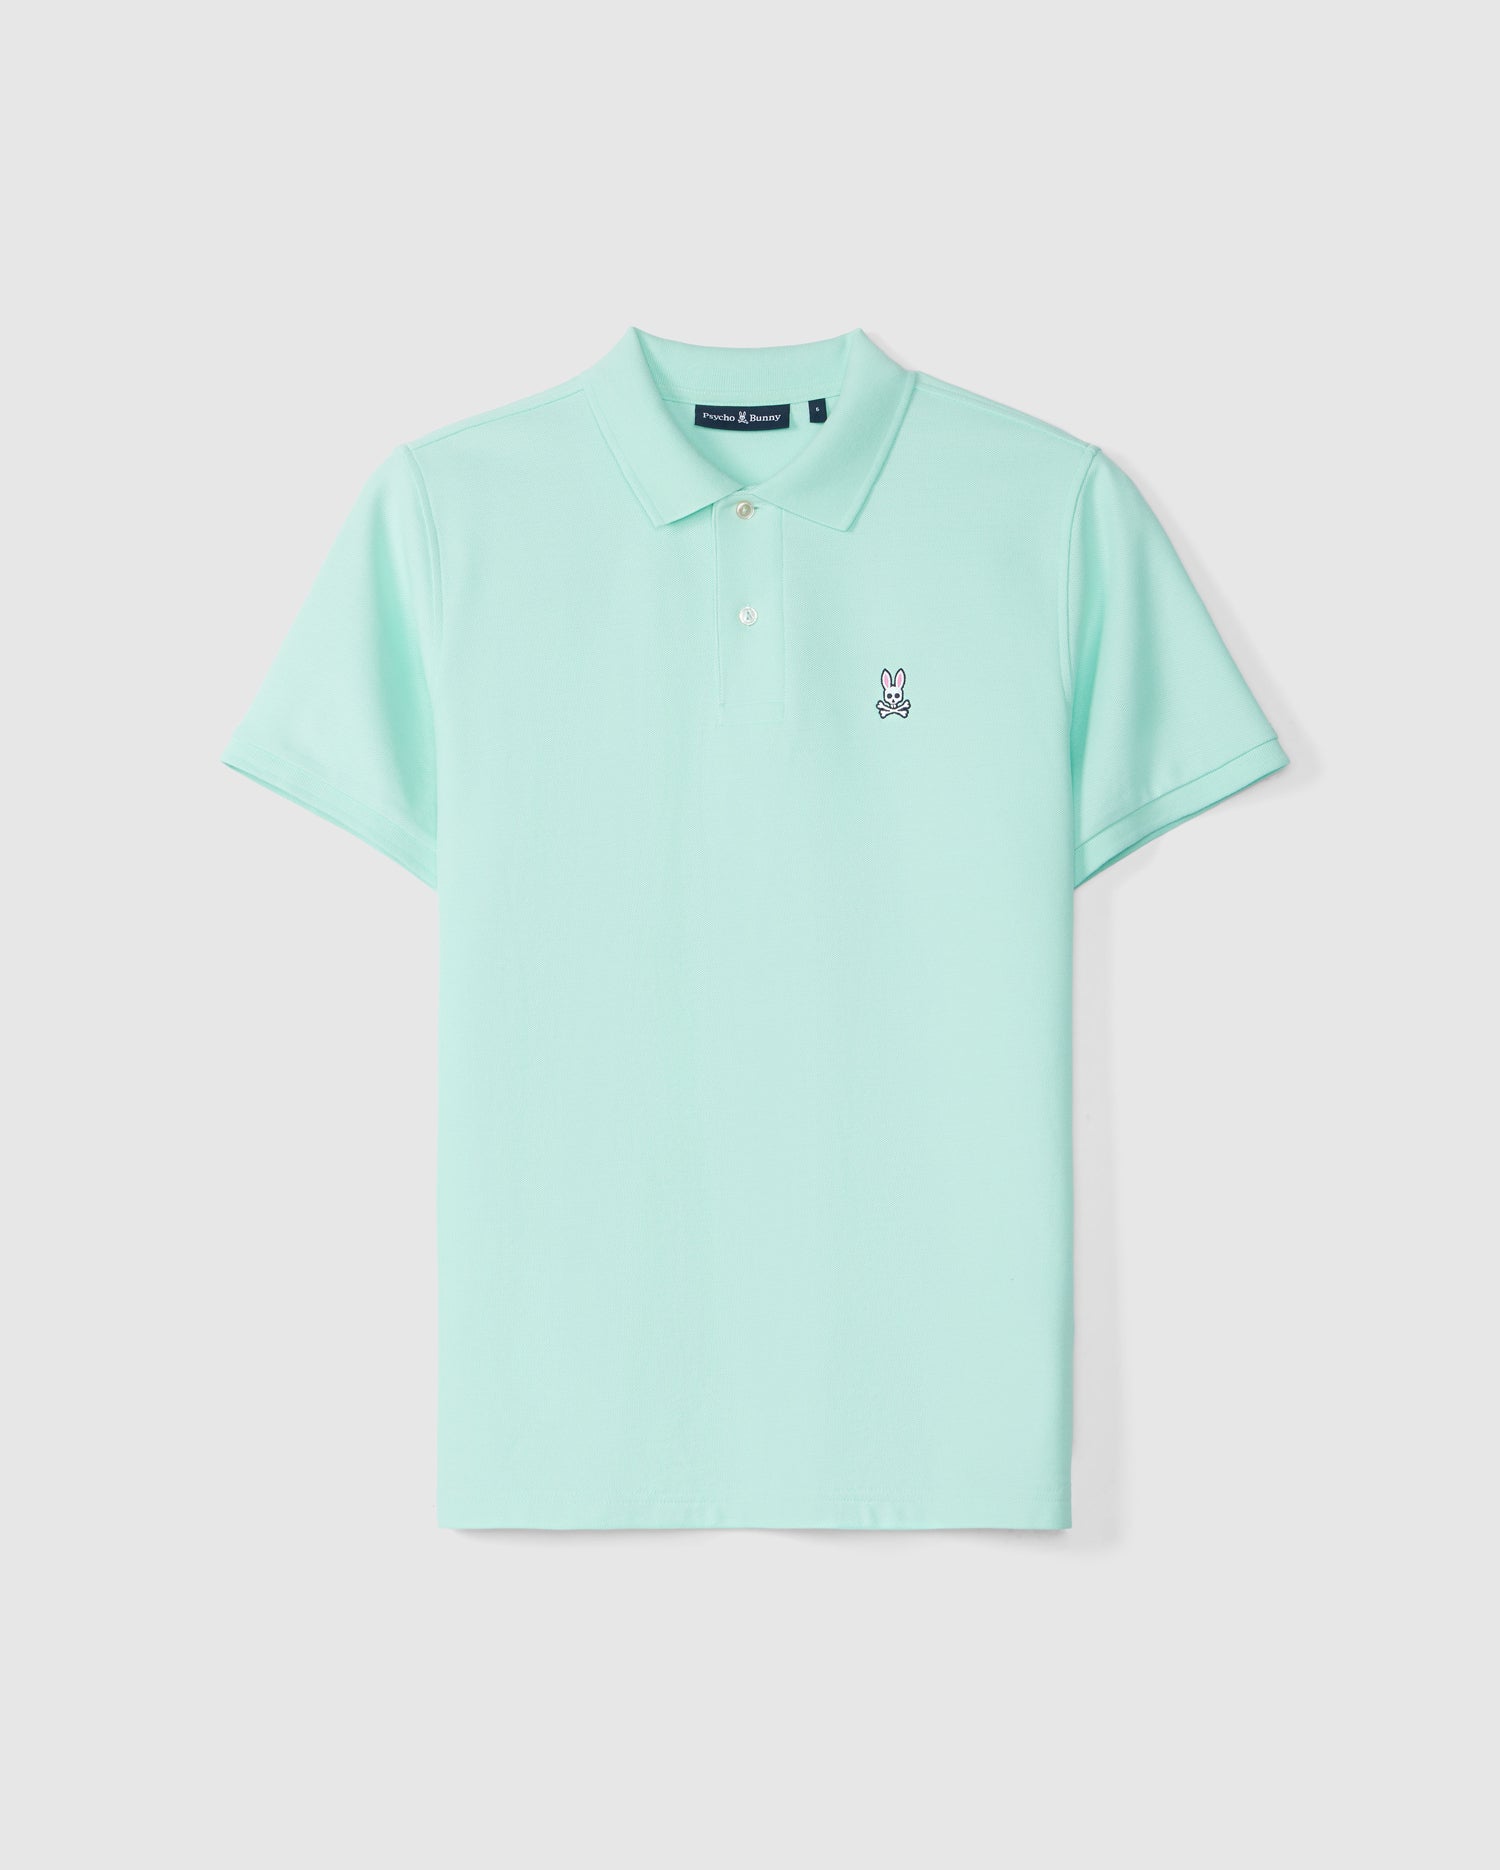 A mint green Psycho Bunny pima cotton polo shirt displayed against a plain background, featuring three buttons and a small white bunny logo on the left chest area.